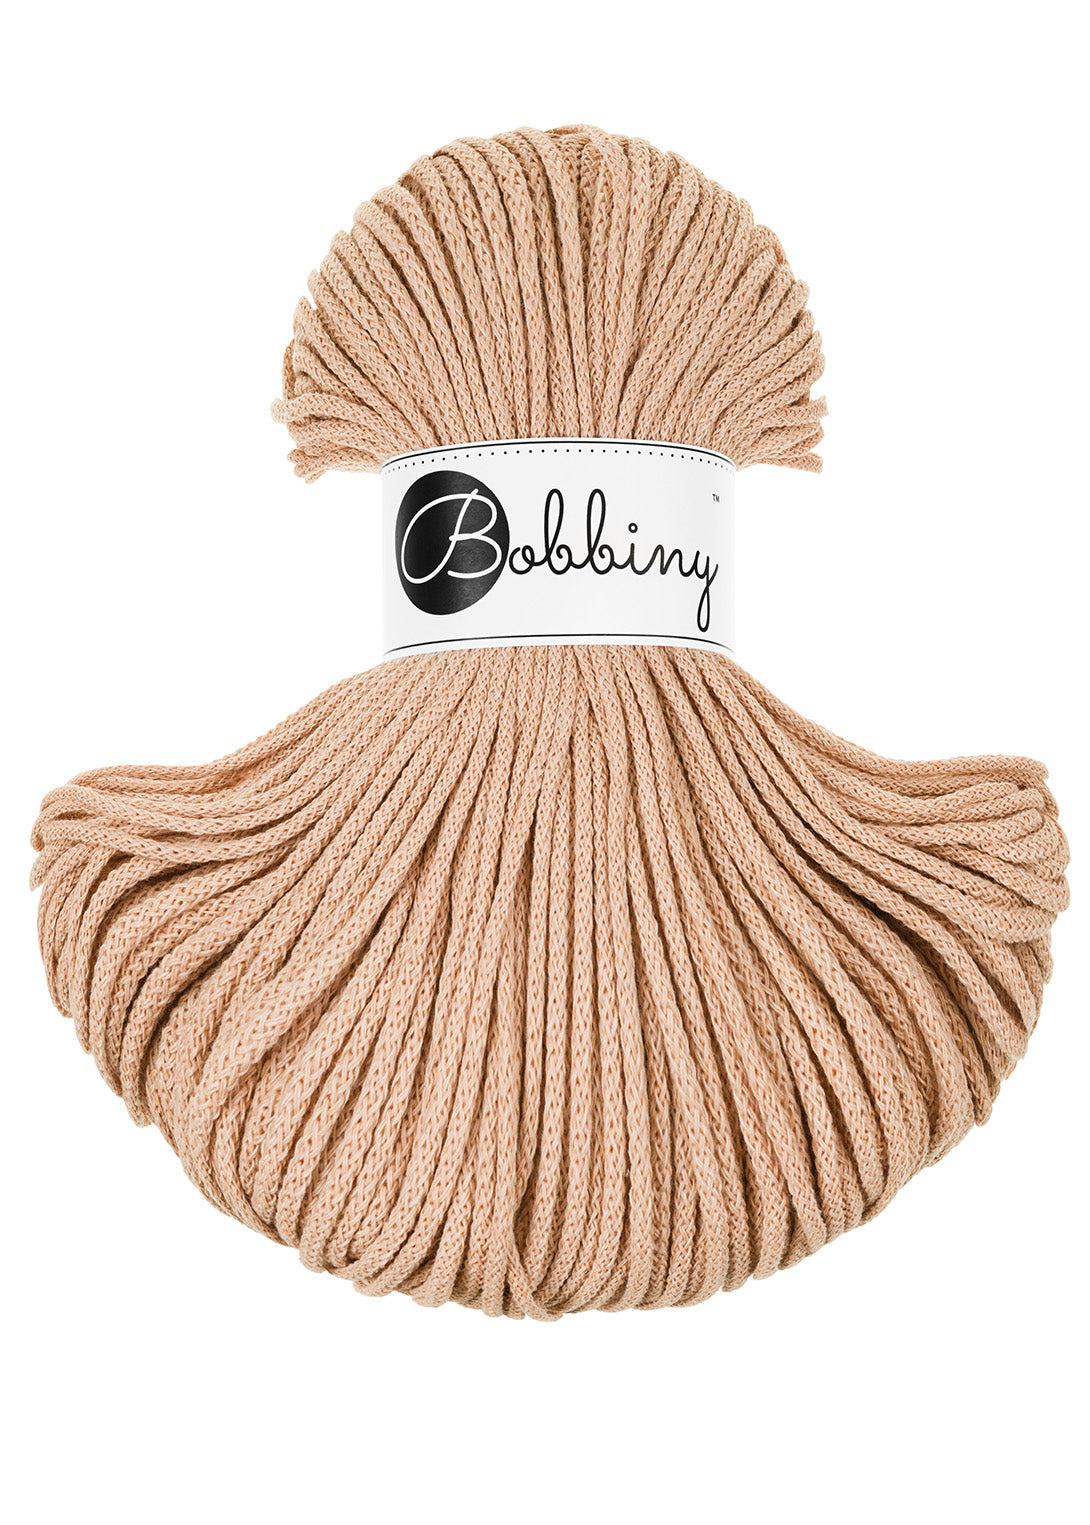 Biscuit shade braided cord 3mm width